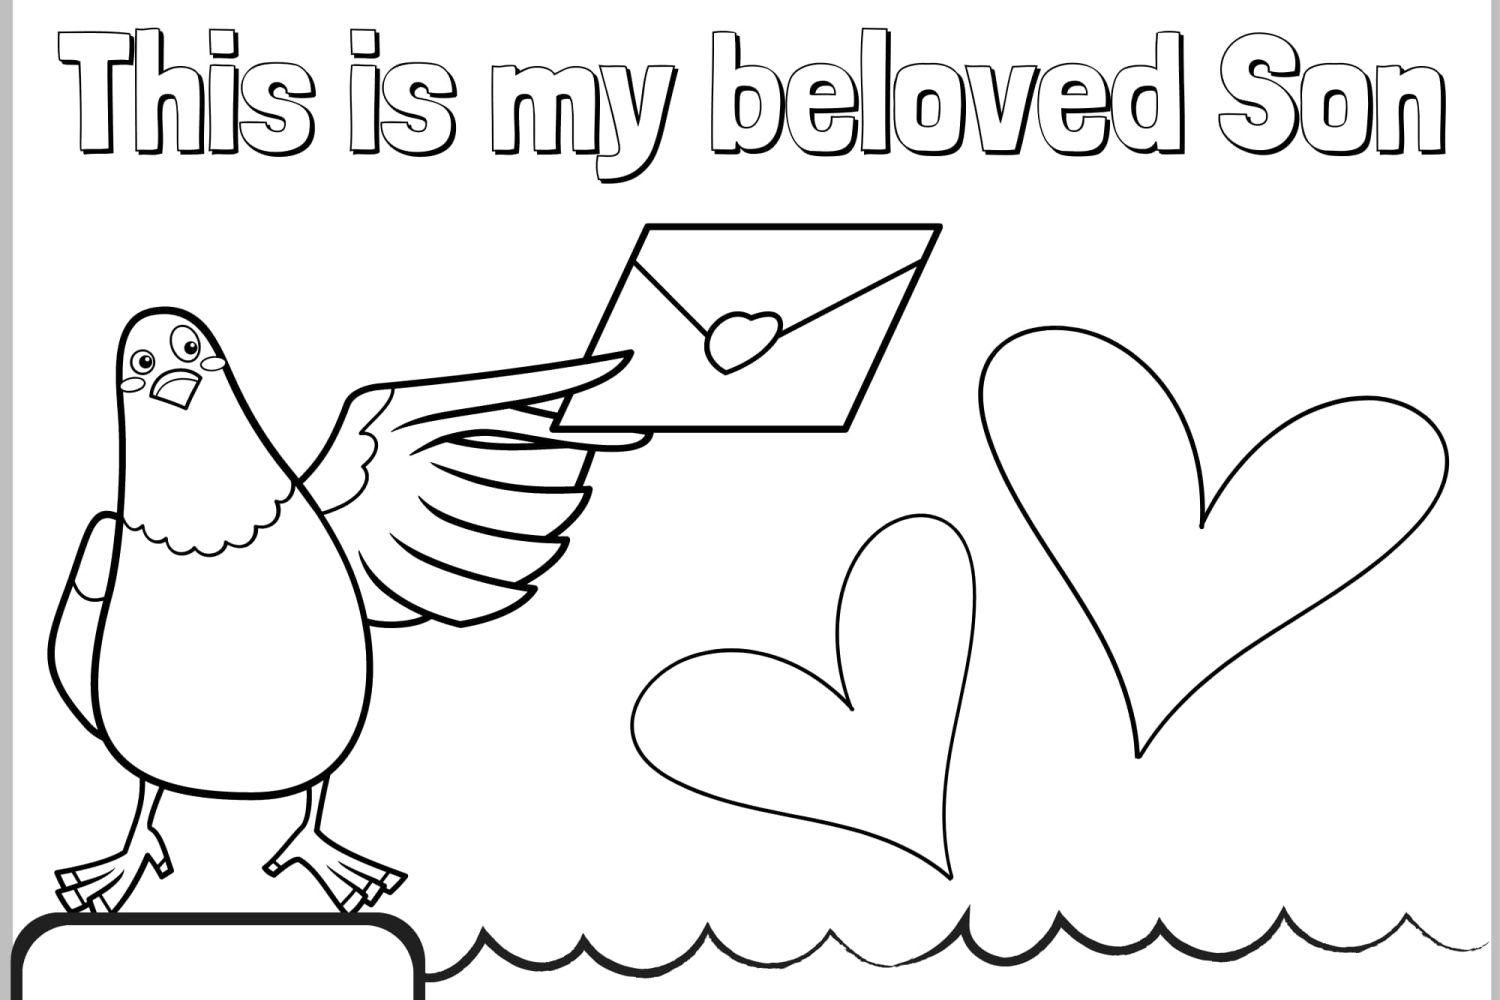 Colouring%20page%20-%20My%20beloved%20son-ce43538c Lying / lies